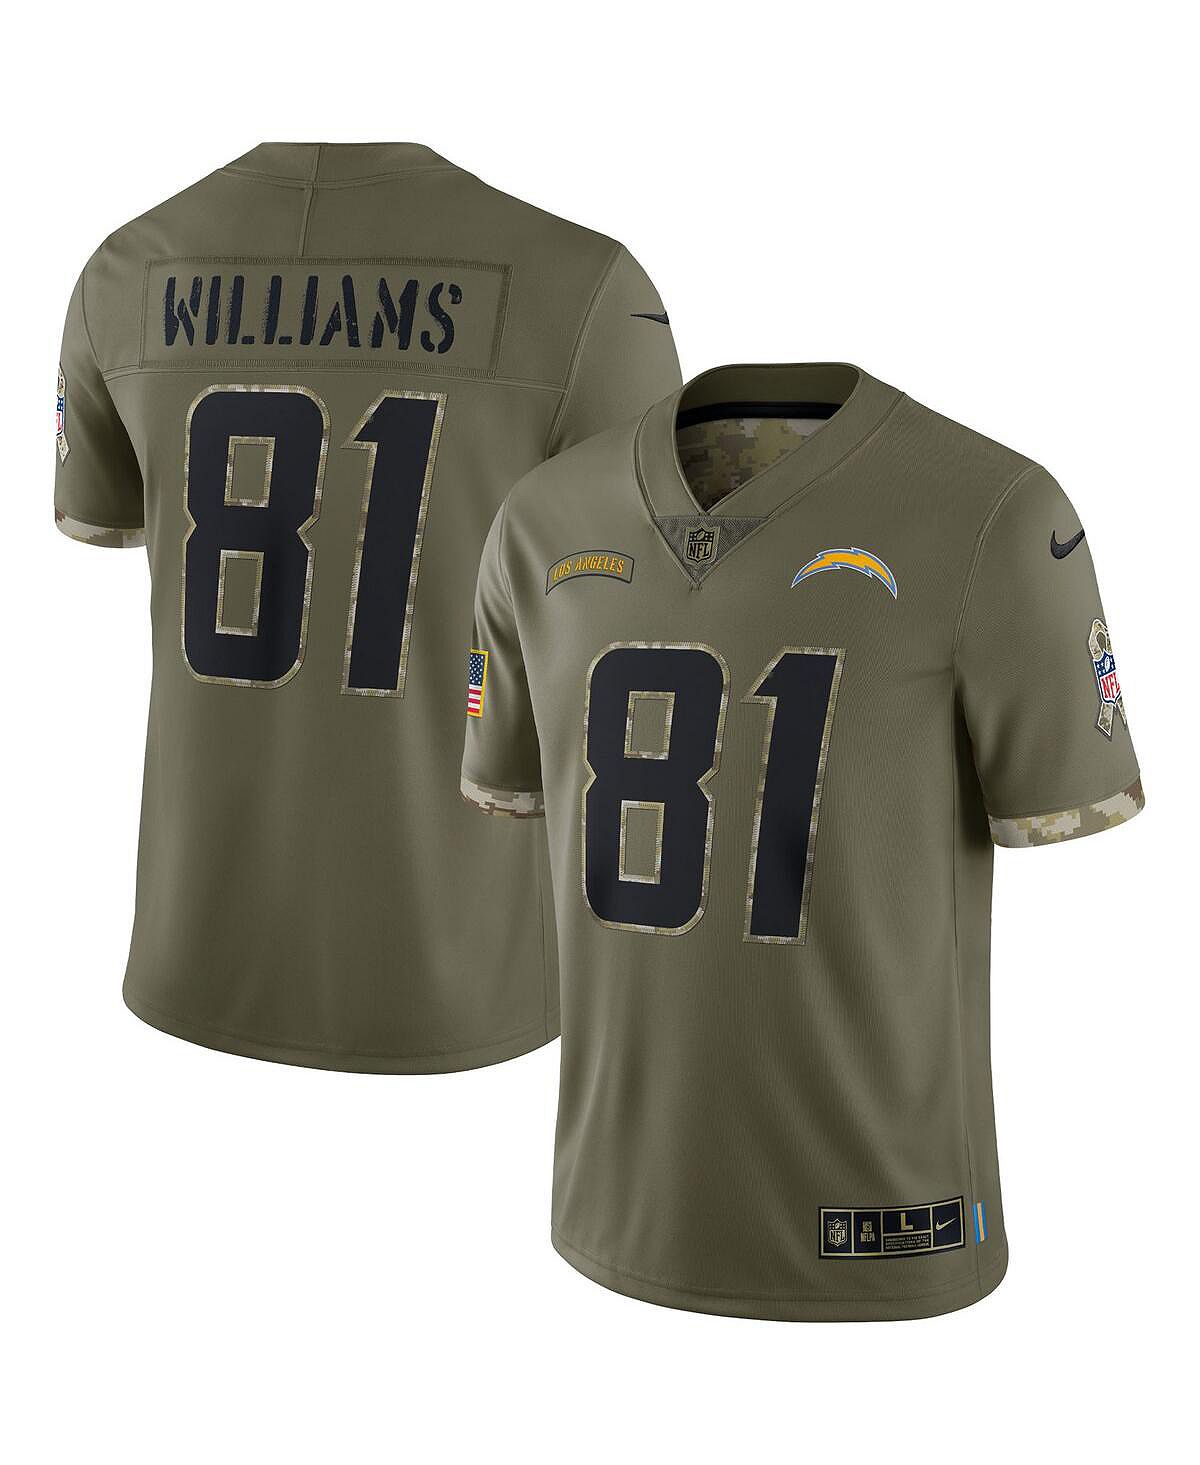 Мужская футболка mike williams olive los angeles chargers 2022 salute to service limited jersey Nike essentials loose design hoodies sweatshirt terry original bag spot california los angeles limited hoody